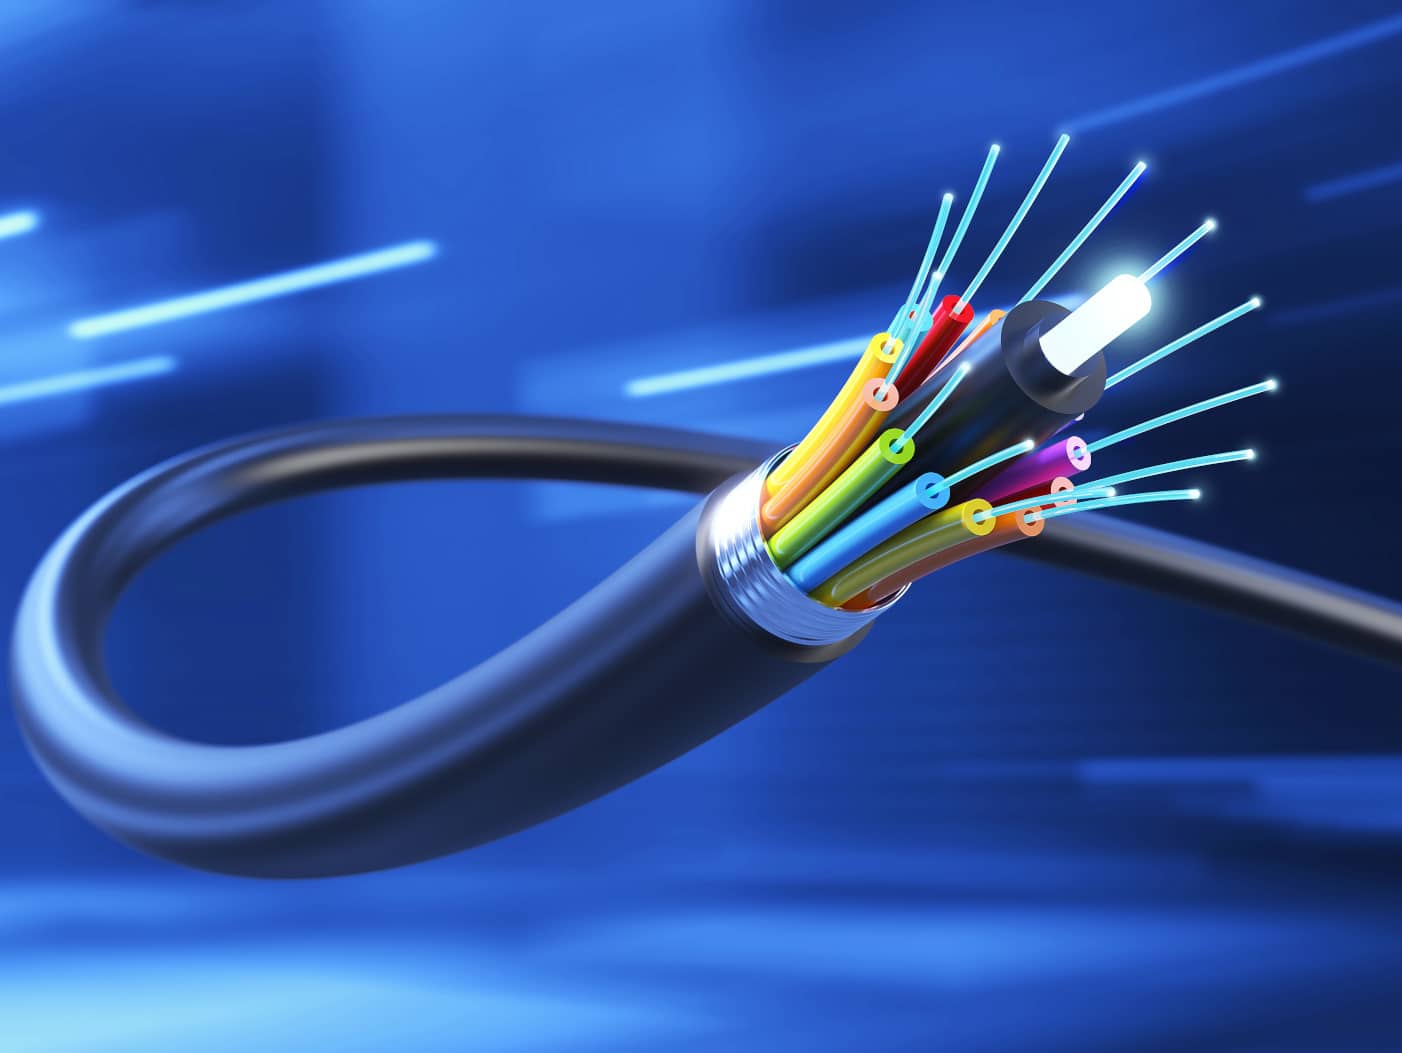 10 Health and Safety Tips for Fibre Optic Splicing Engineers